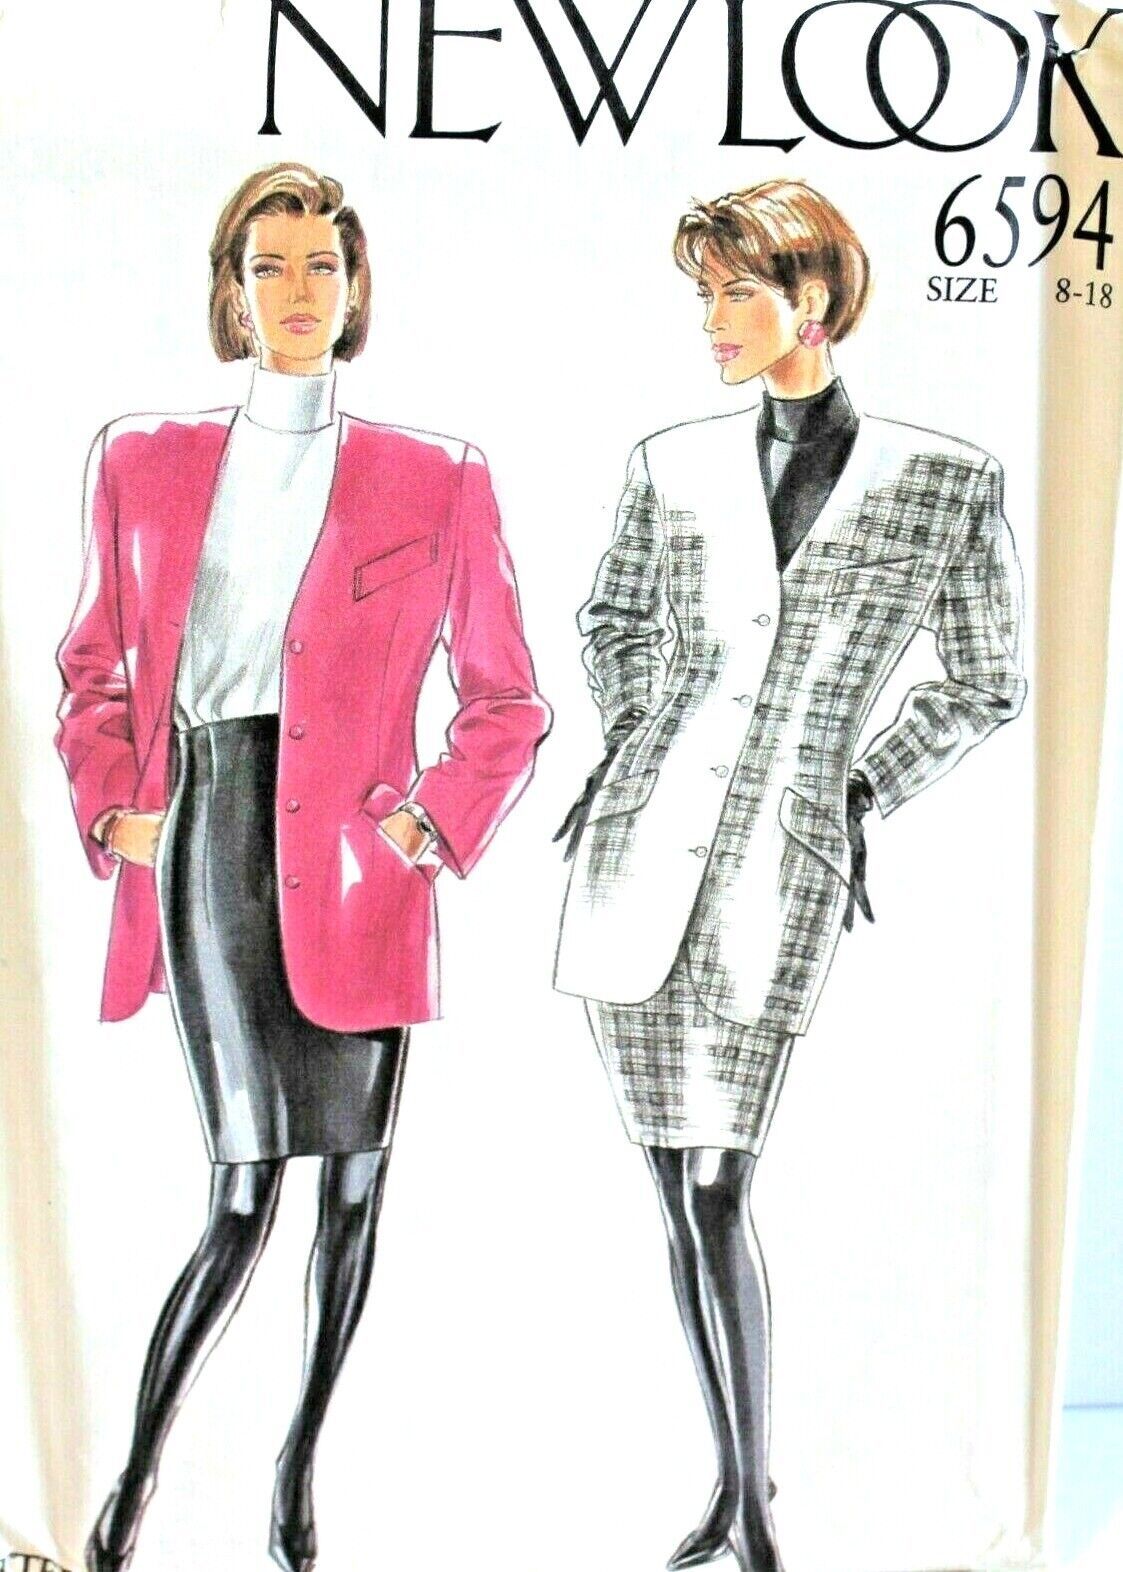 Primary image for New Look 6594 Sewing Pattern Jacket Skirt Sizes 8-18